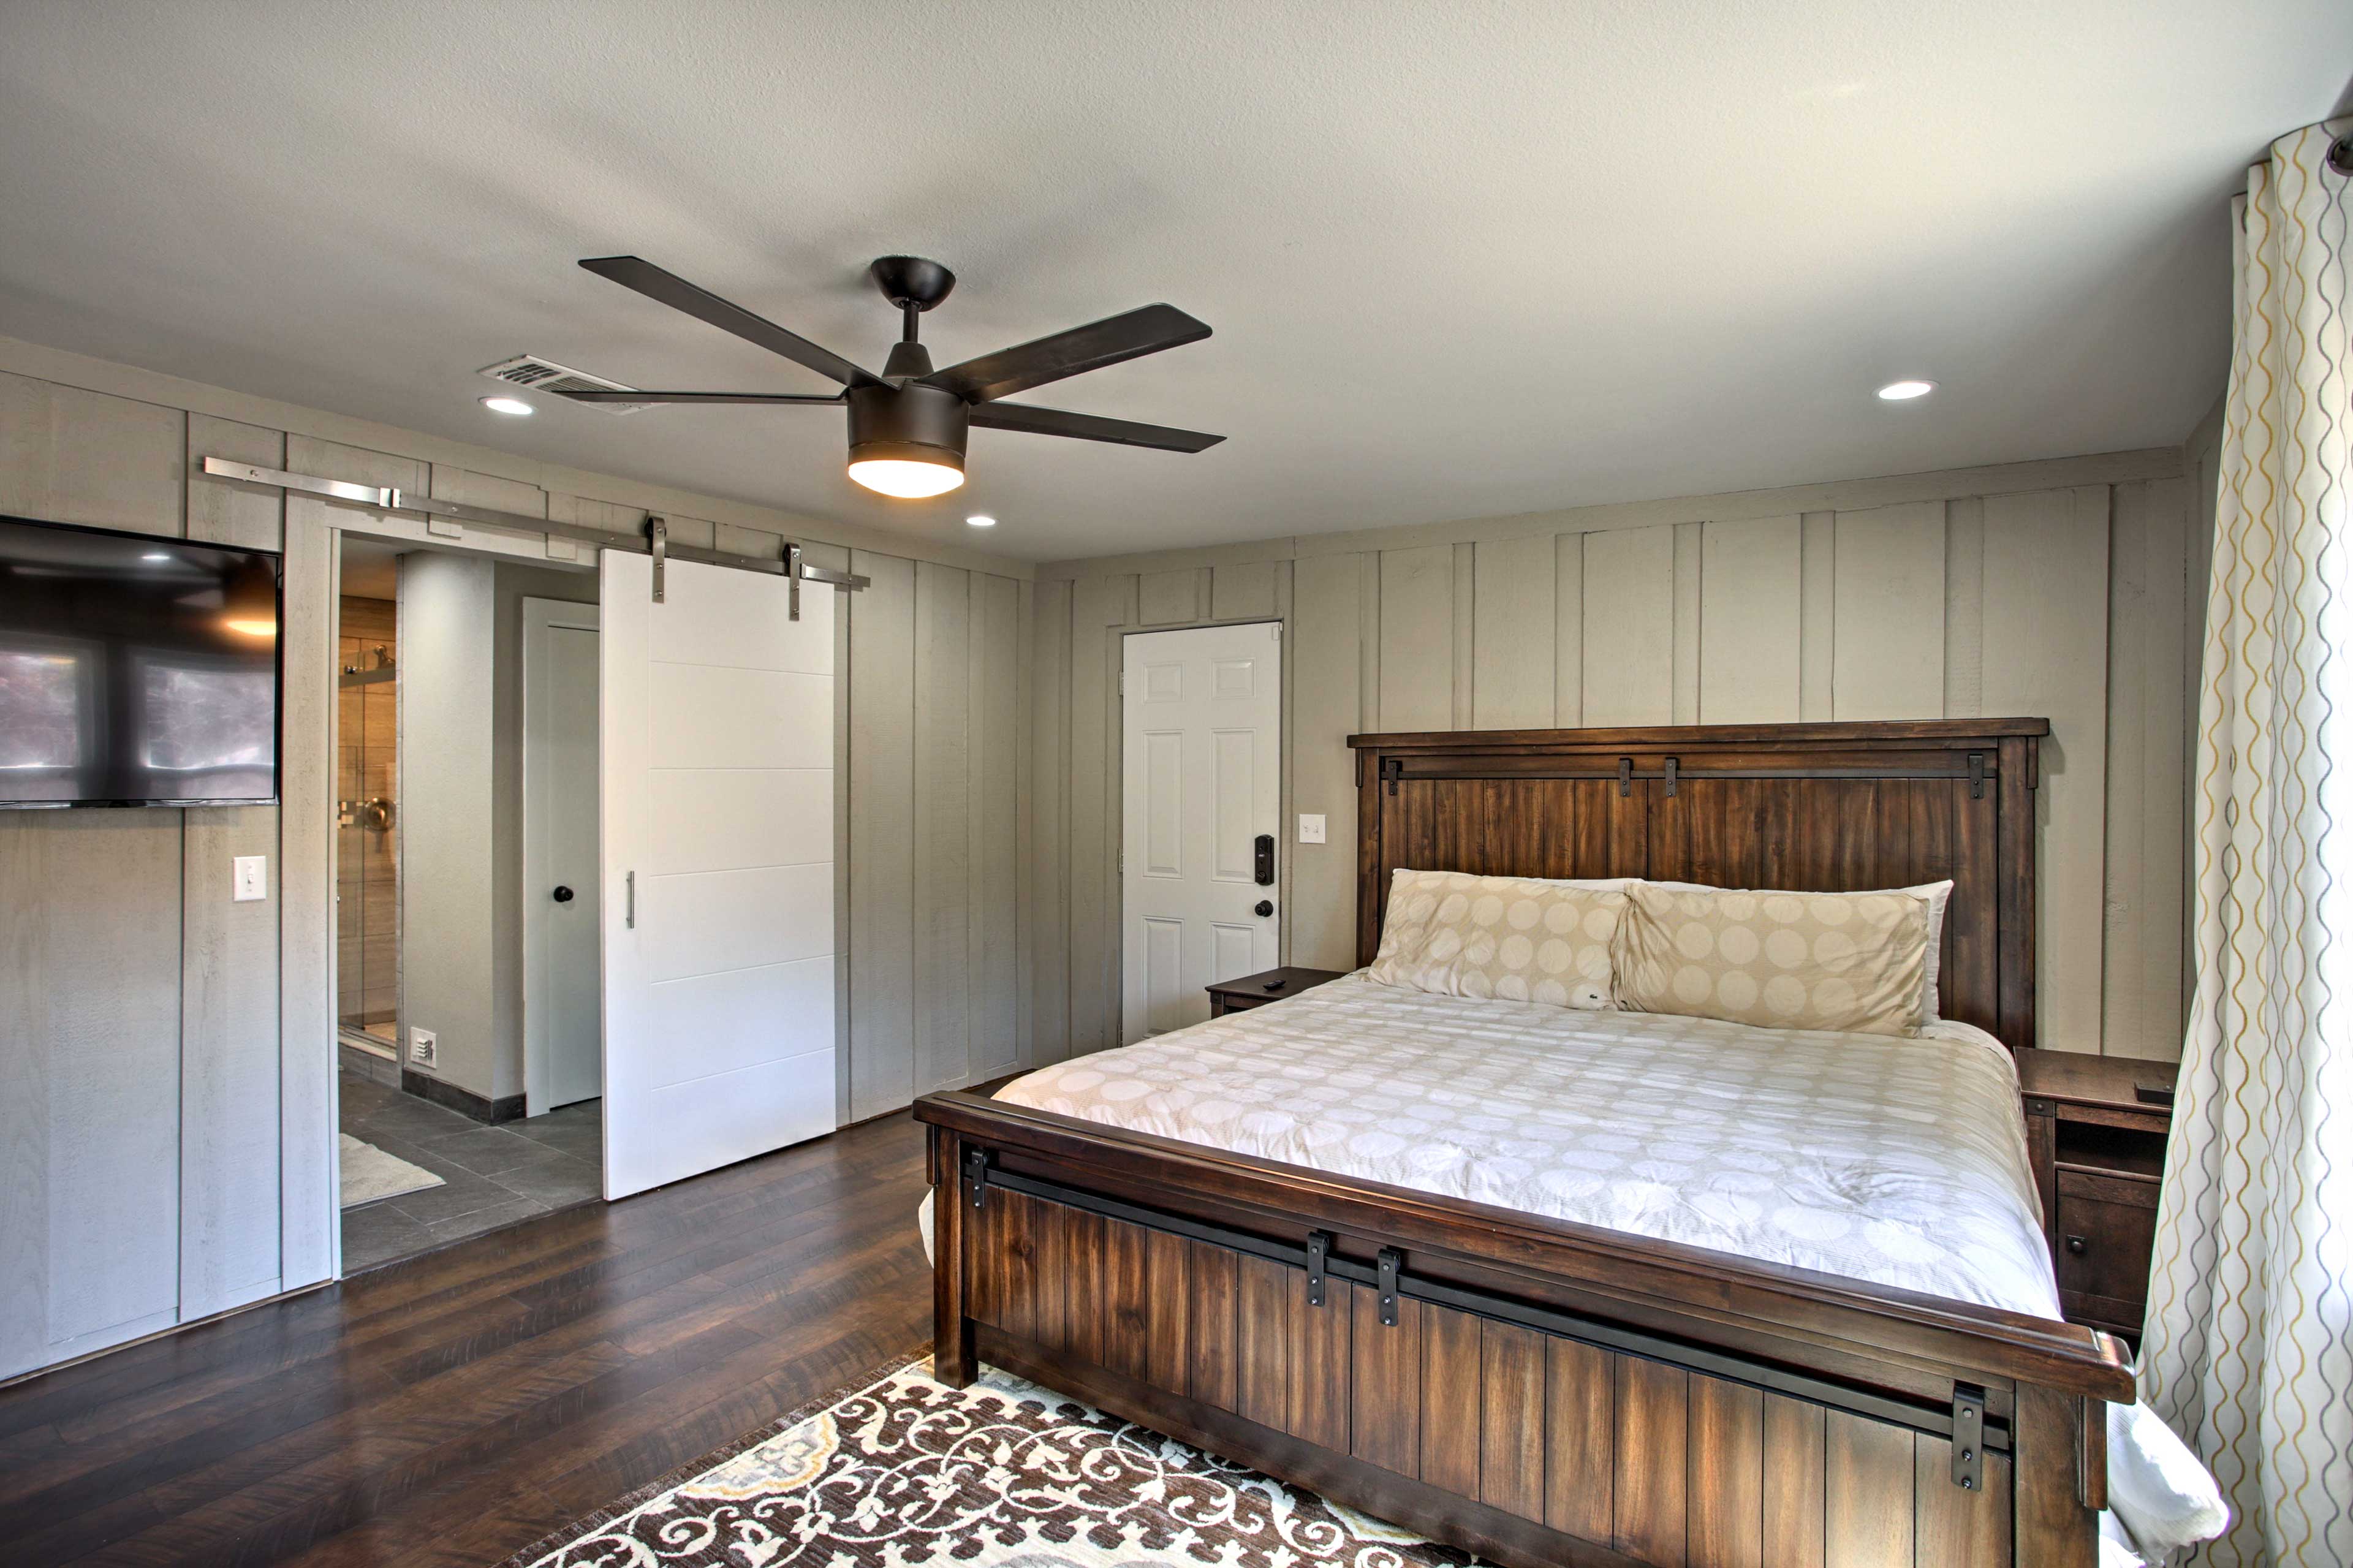 You’ll find restful nights of sleep in the king master suite.